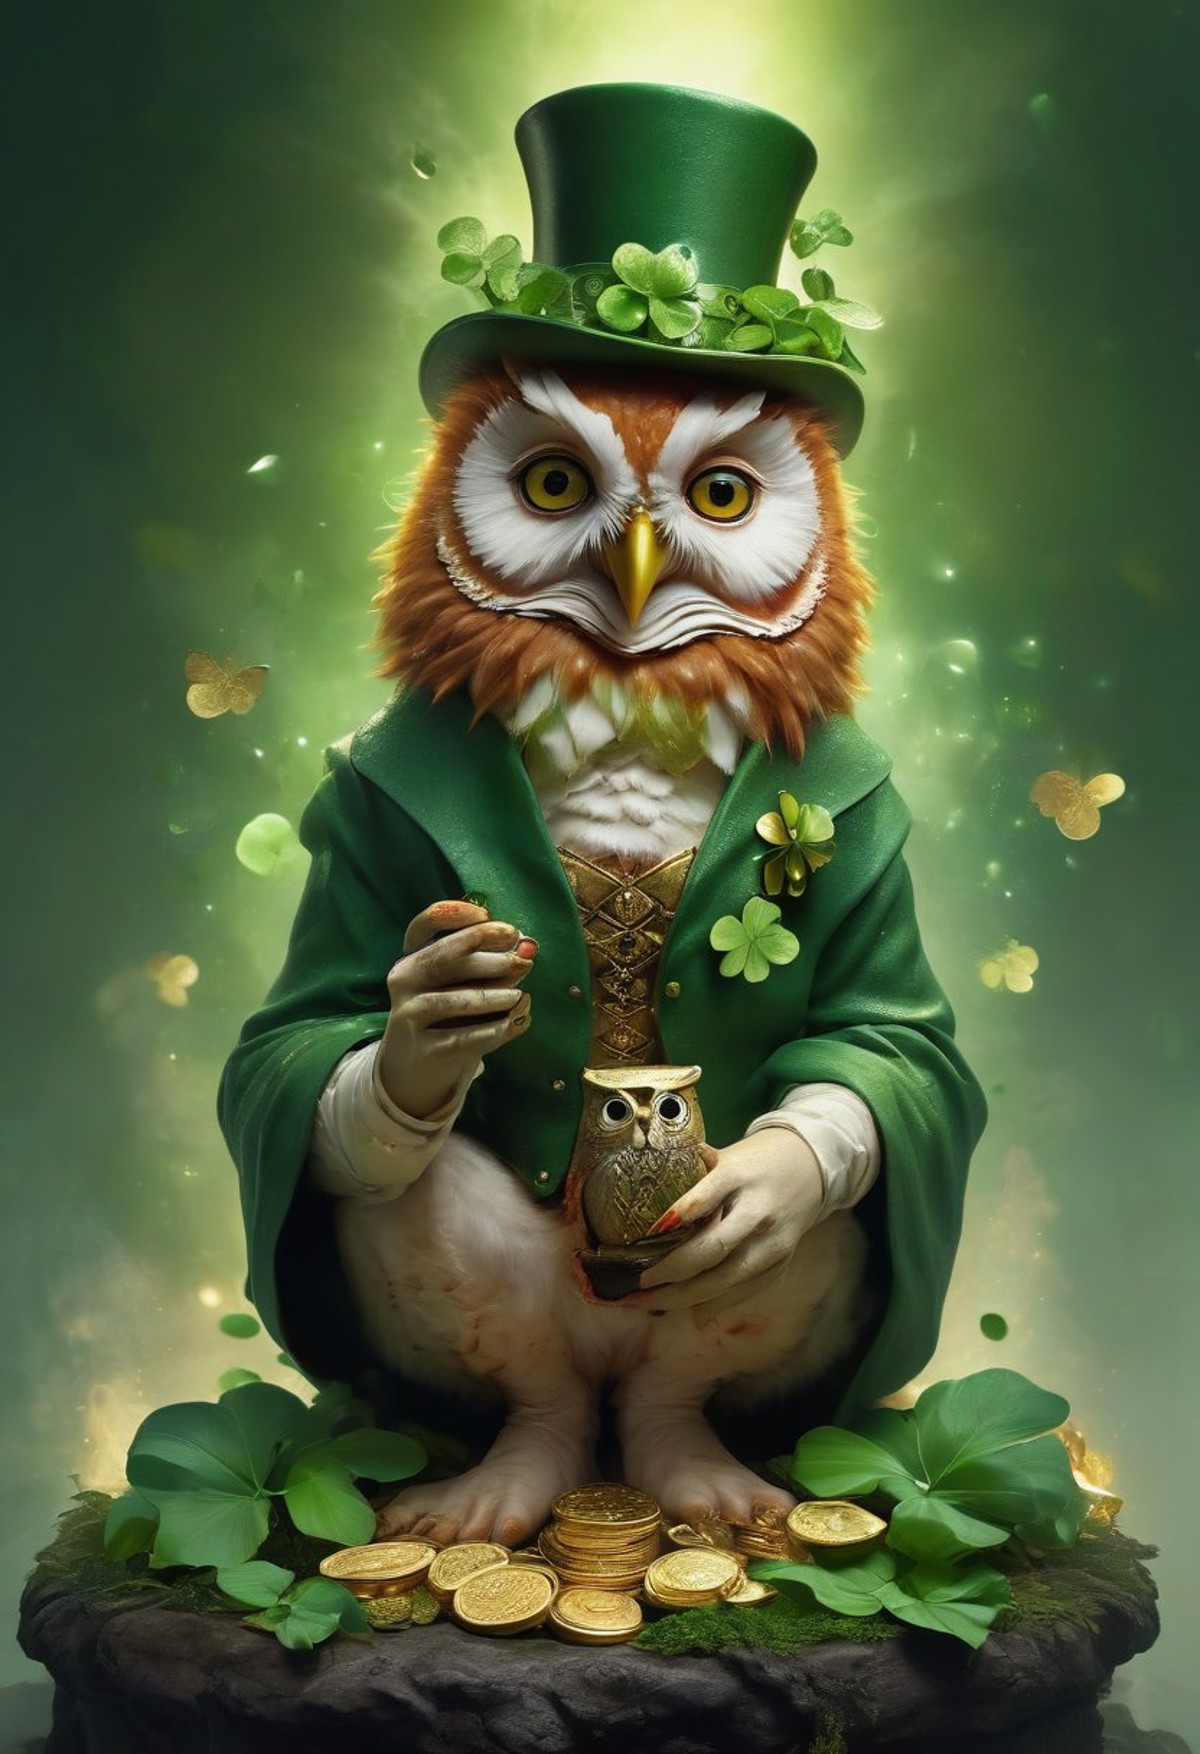 leprechauns ginger woman with corned beef, green, sitting on top owl, glowing eyes, mist, exploding 4leaf shamrock in back...